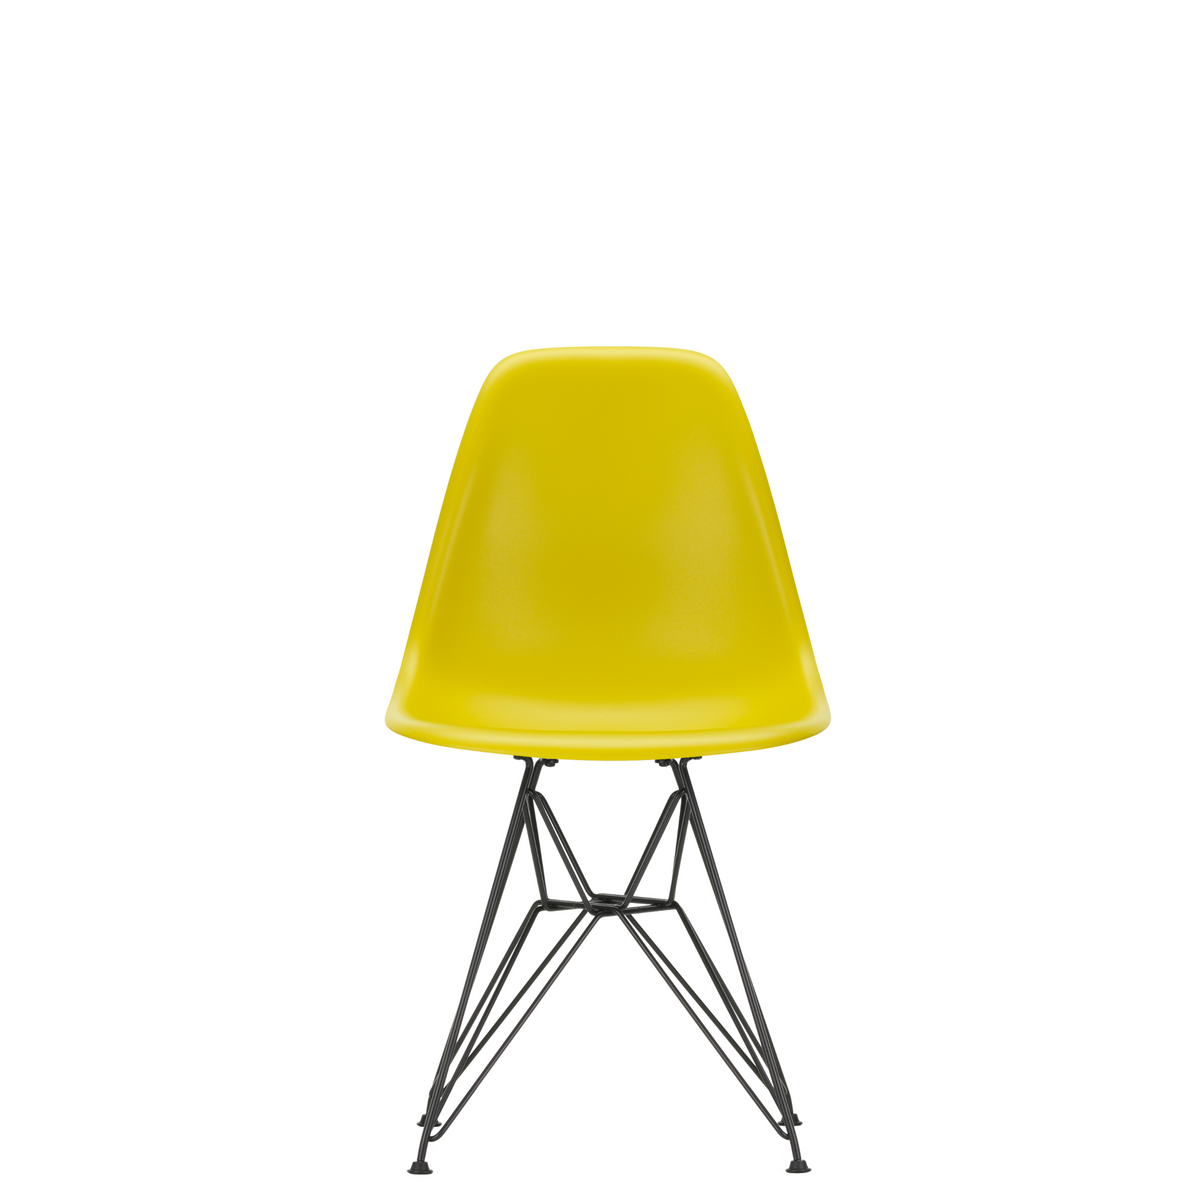 Vitra Eames Plastic Side Chair DSR Powder Coated for Outdoor Use Mustard Shell Black Powdercoated Base